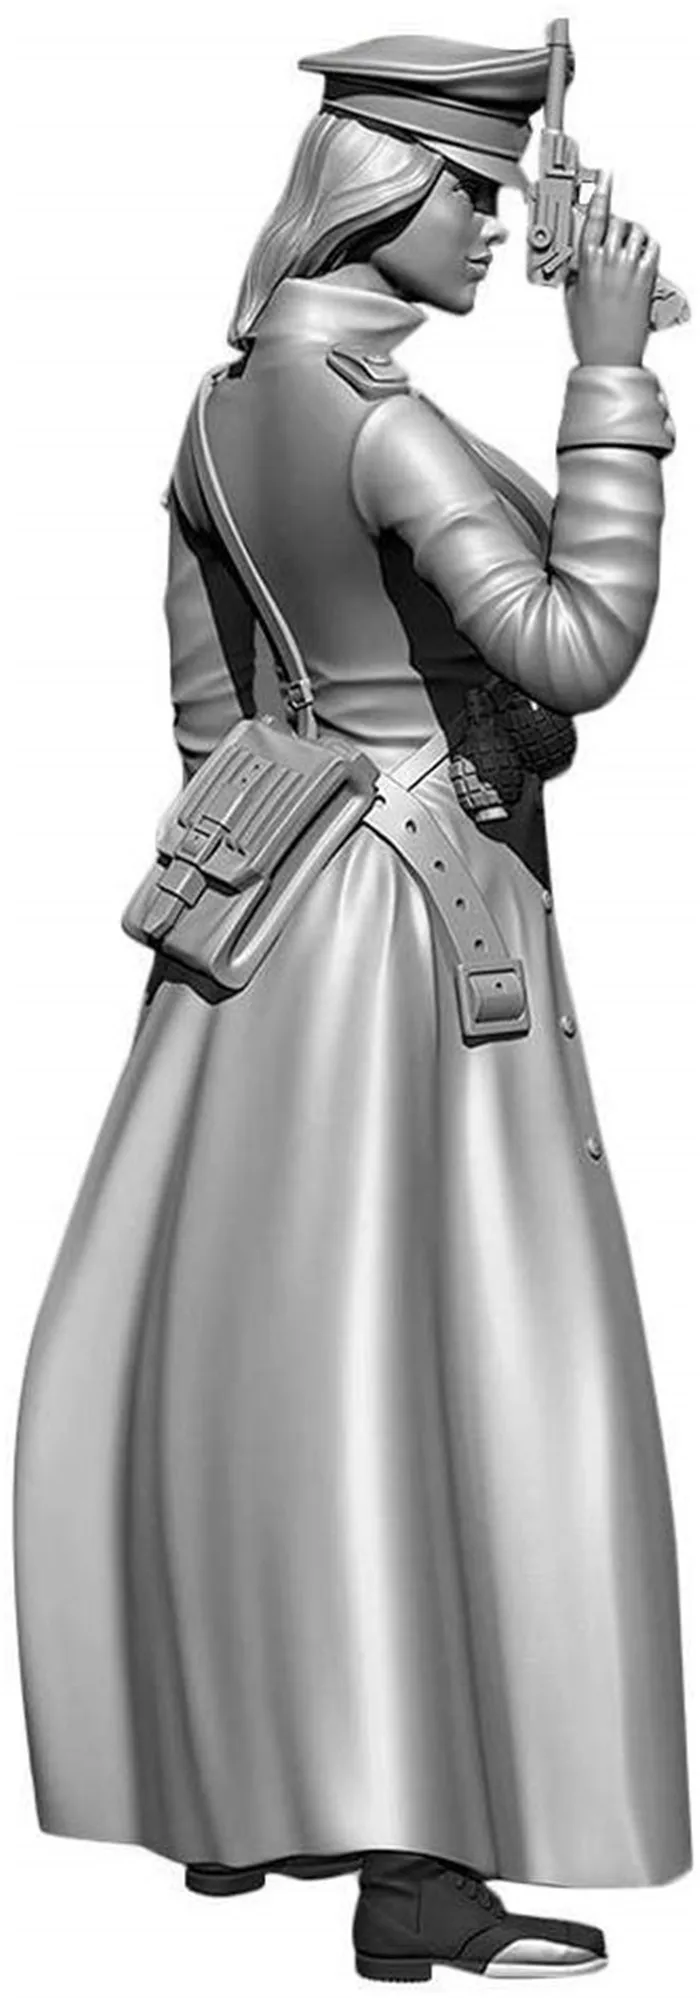 Details about   1/24 Resin Figure Model Kit Beauty Queen soldier victory unpainted unassembled